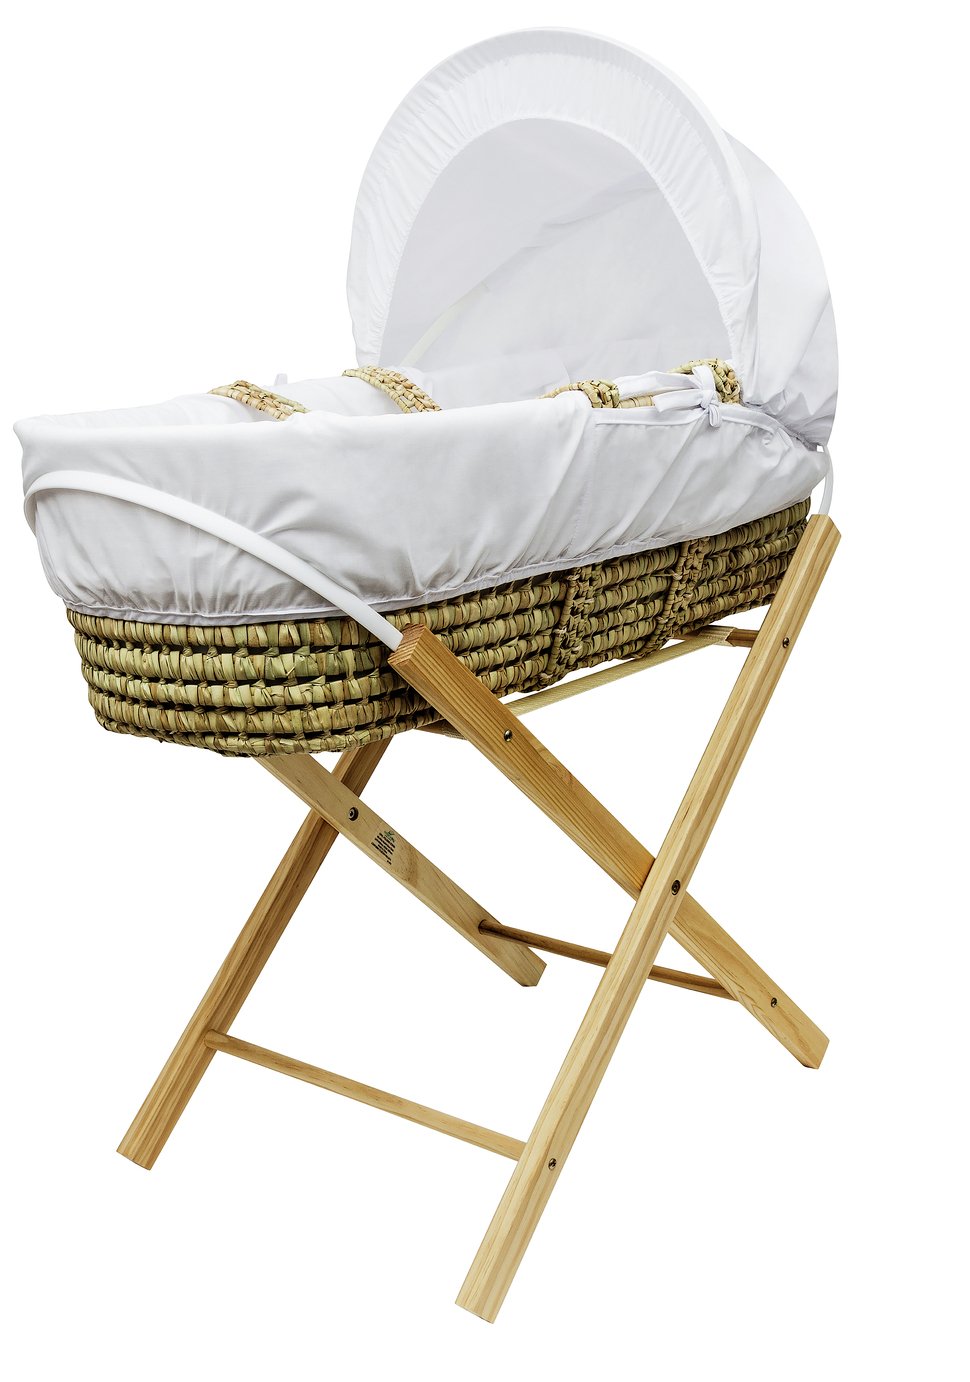 Sleepy Owl Palm Basket and Folding Stand Review